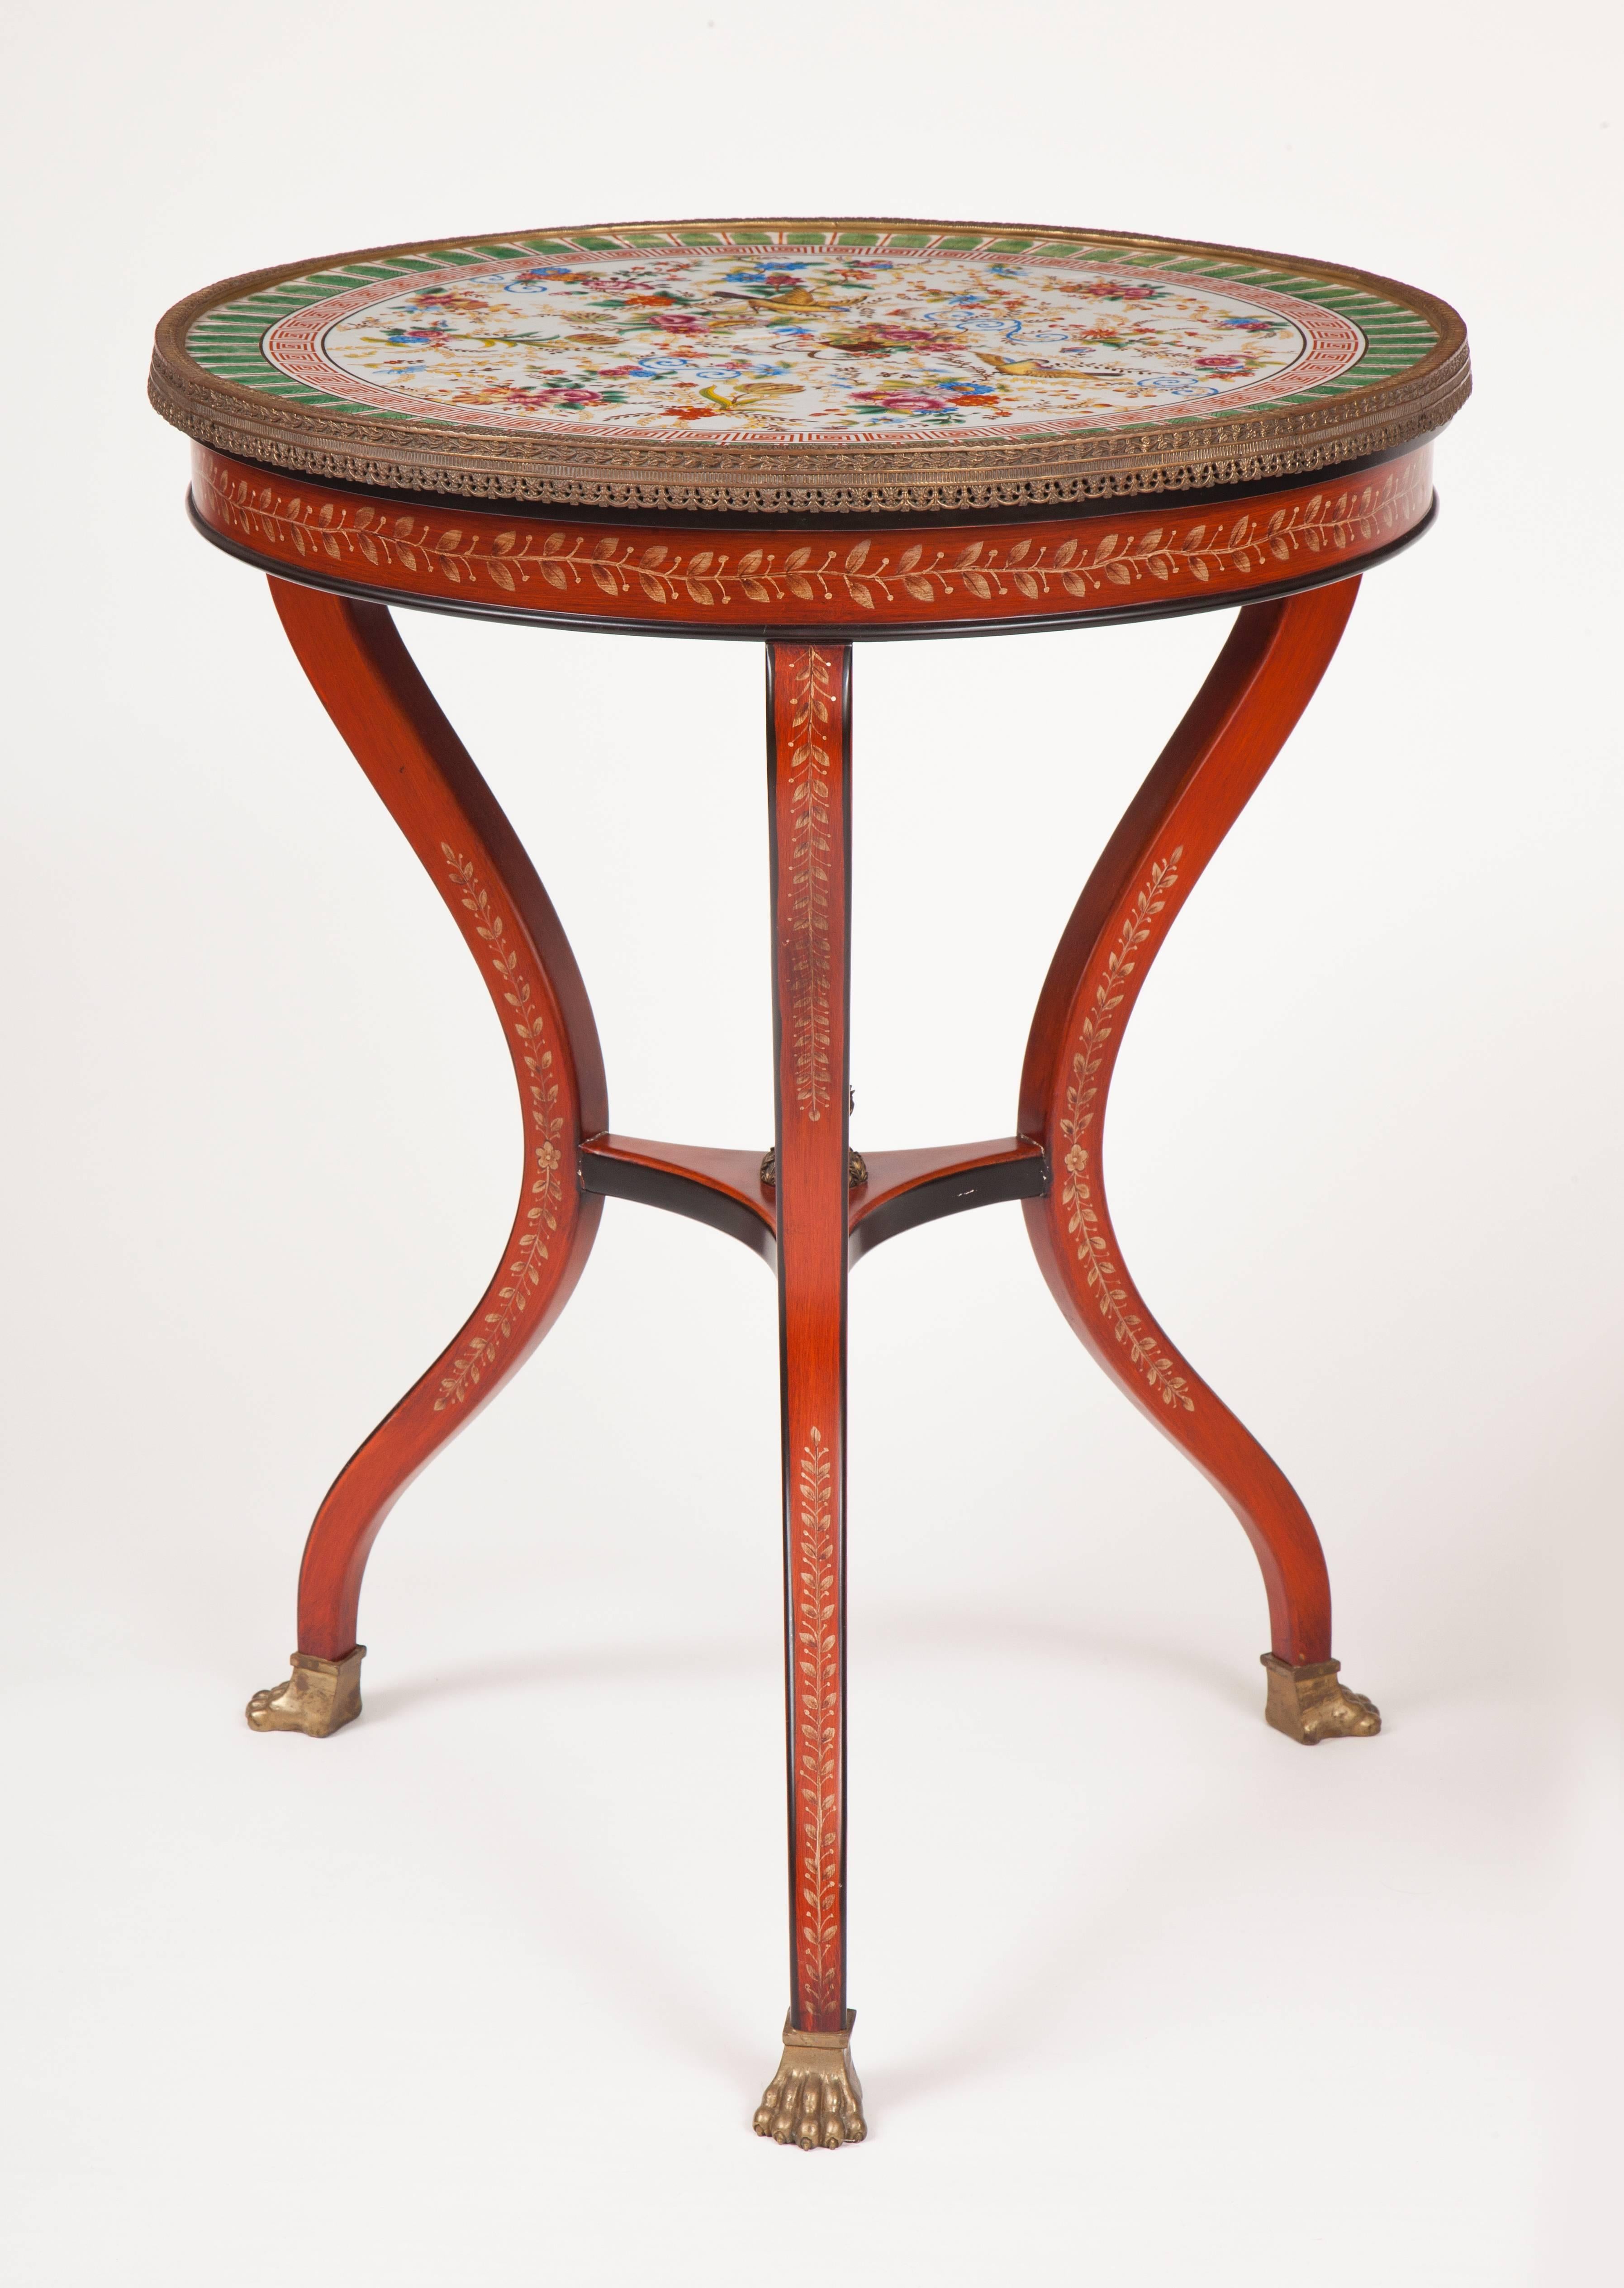 This pair of French tripod tables, or gueridons, each has a circular porcelain top in the Chinese family rose palette surrounded by a figured gilded bronze band above a red lacquered apron raised on three curved red lacquered legs joined by a